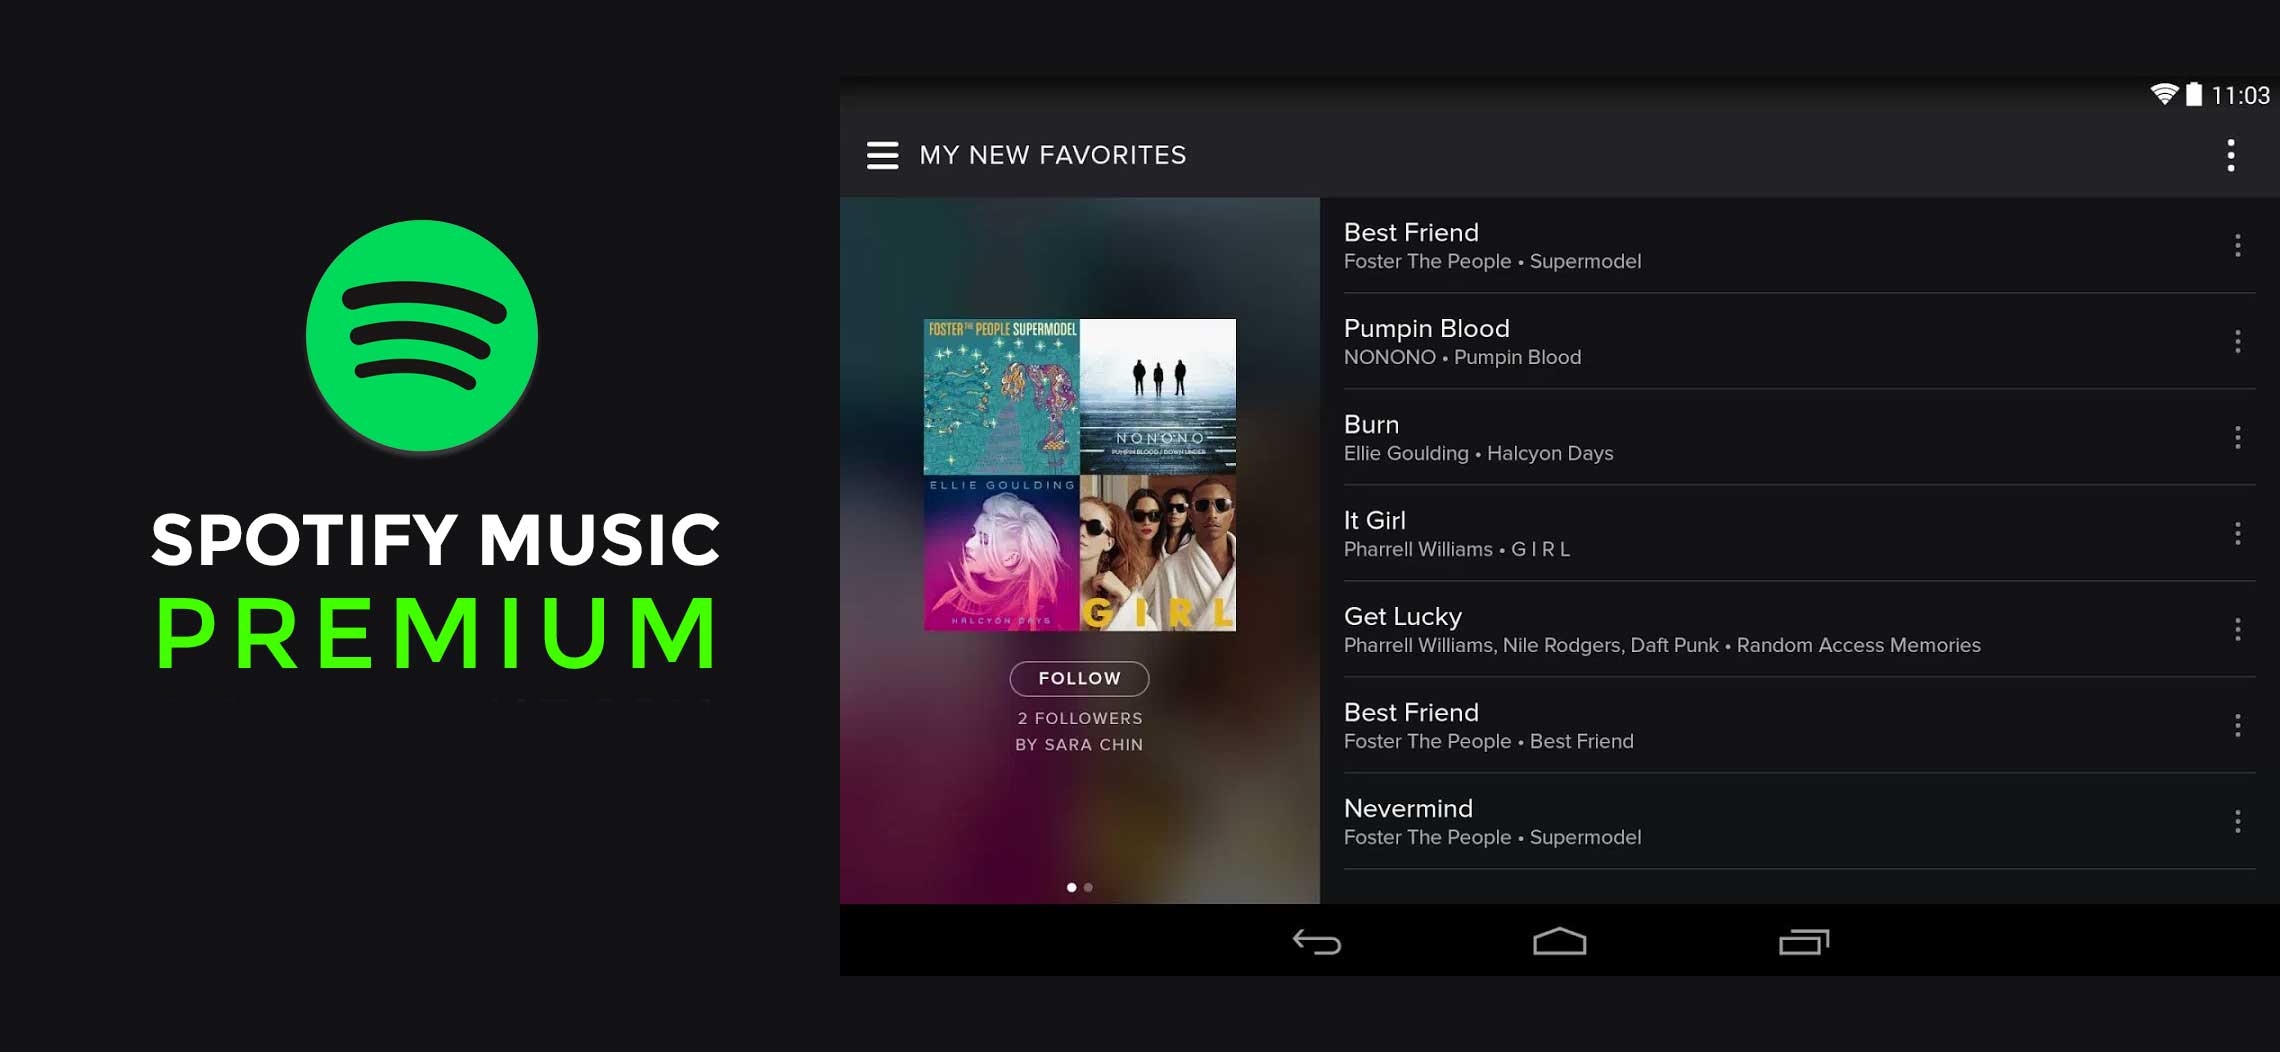 Spotify Premium: How To Get It On Your Device